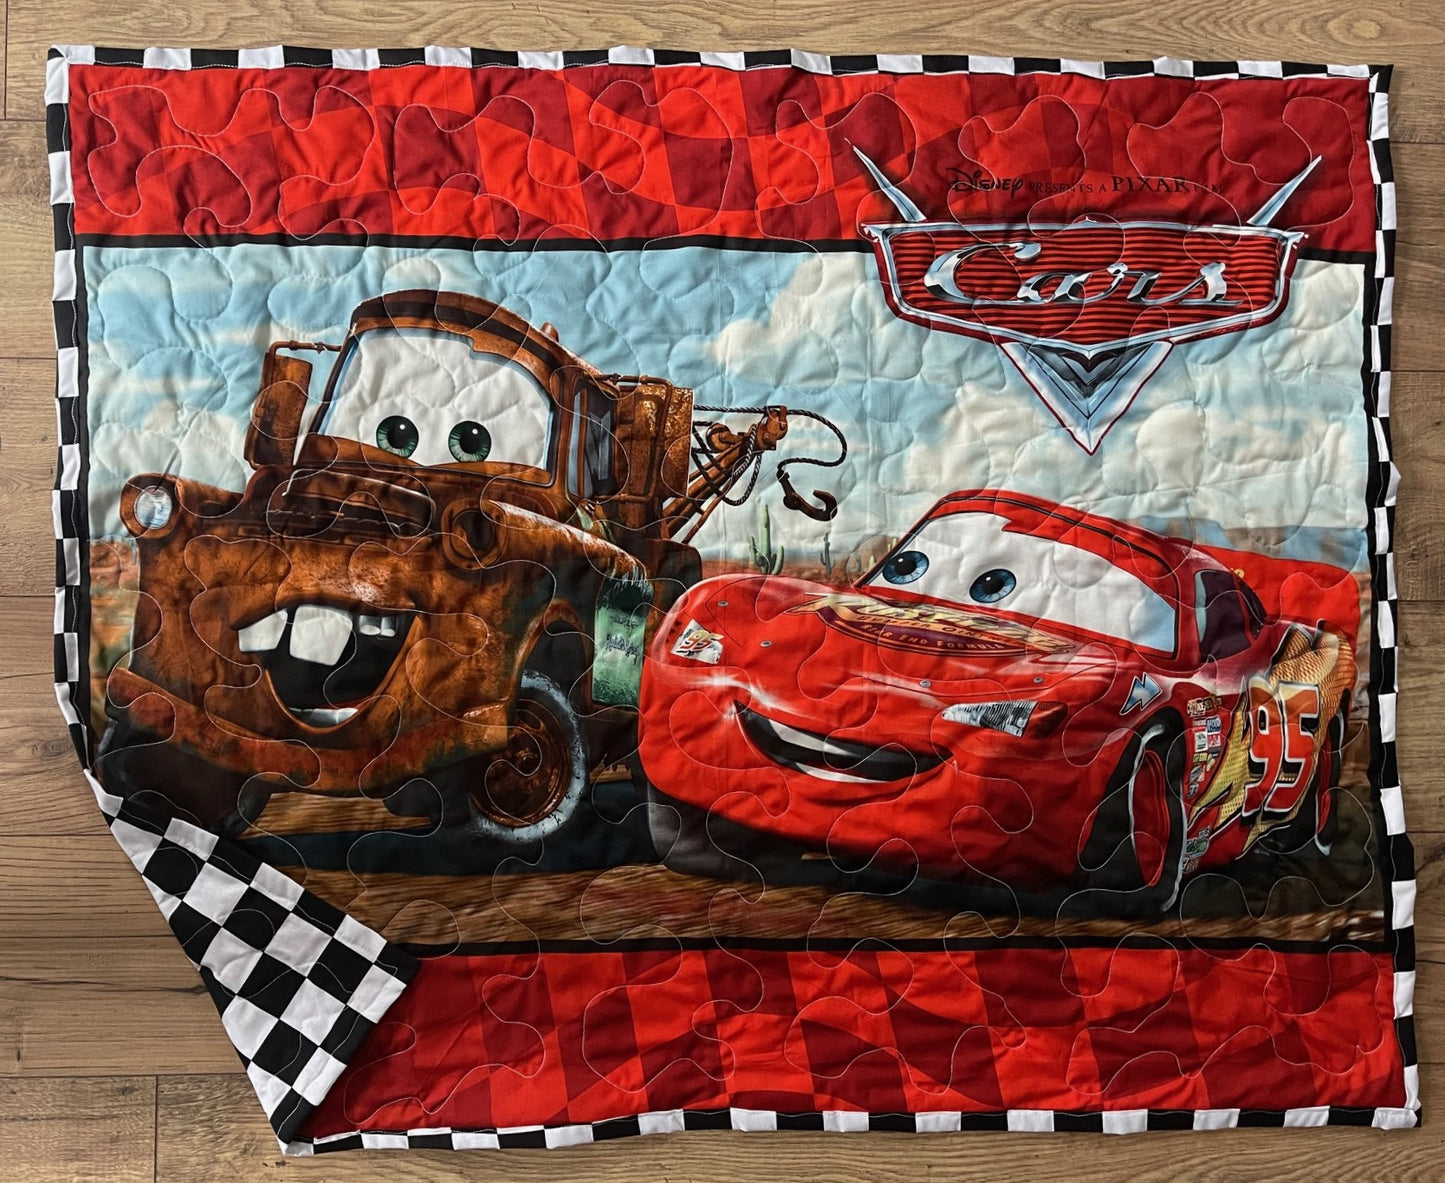 DISNEY CARS MATER & LGHTNING MC QUEEN 95 INSPIRED 36"X44" QUILTED BLANKET 1 AVAILABLE